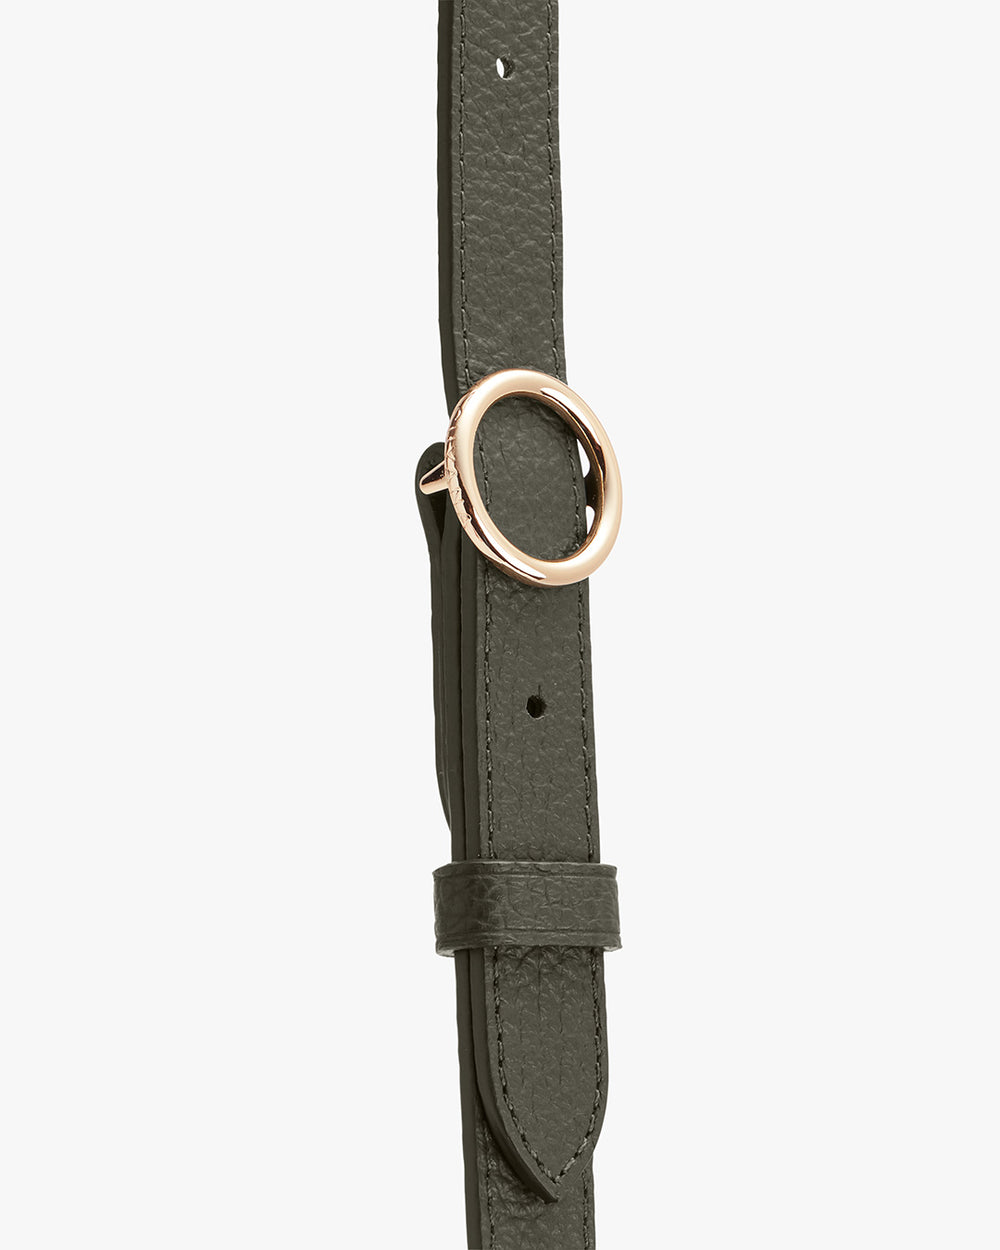 Belt with a circular buckle and loop detail.